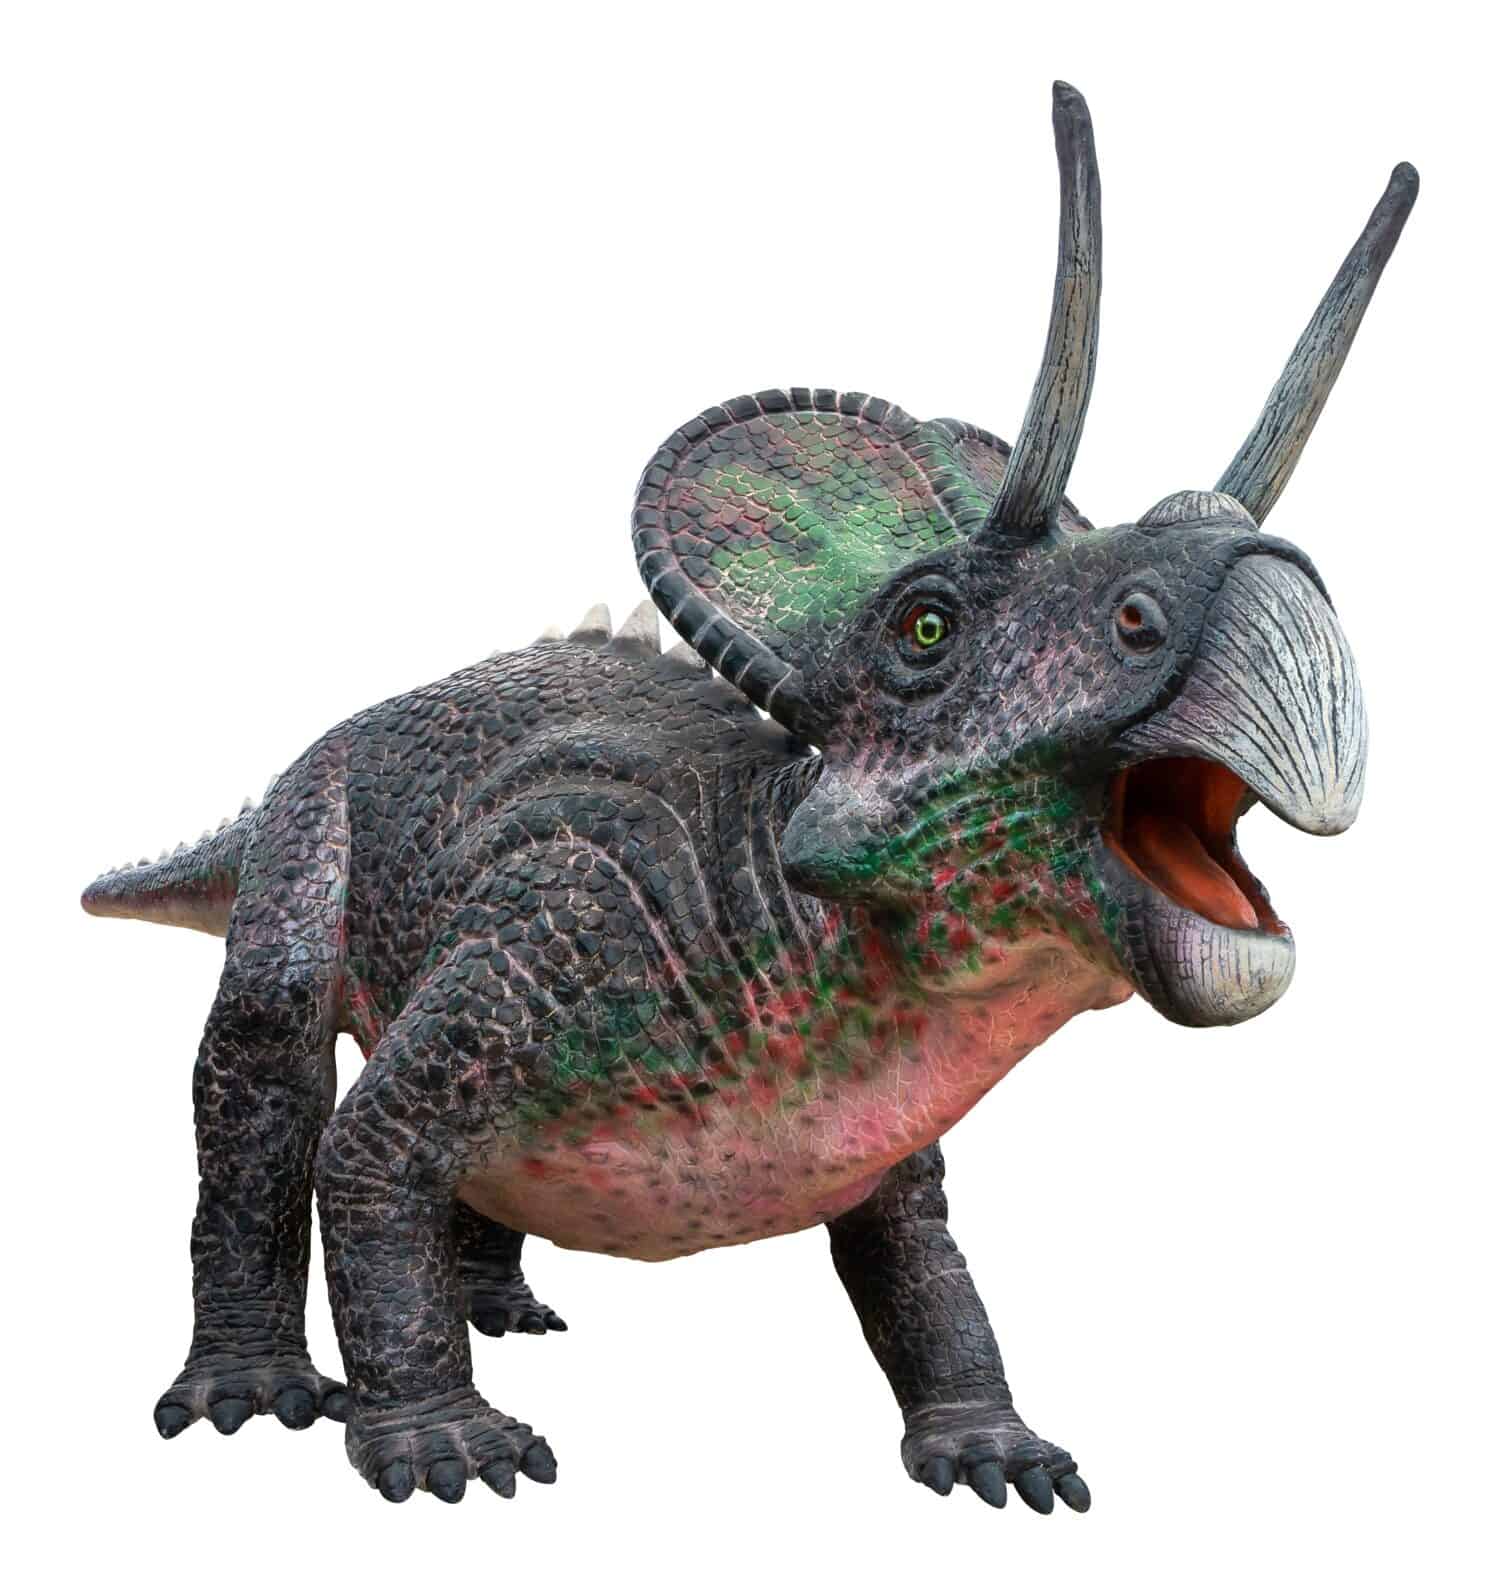 Zuniceratops was a herbivore ceratopsian dinosaur from the mid-Turonian of the Late Cretaceous Period, Zuniceratops isolated on white background with clipping path